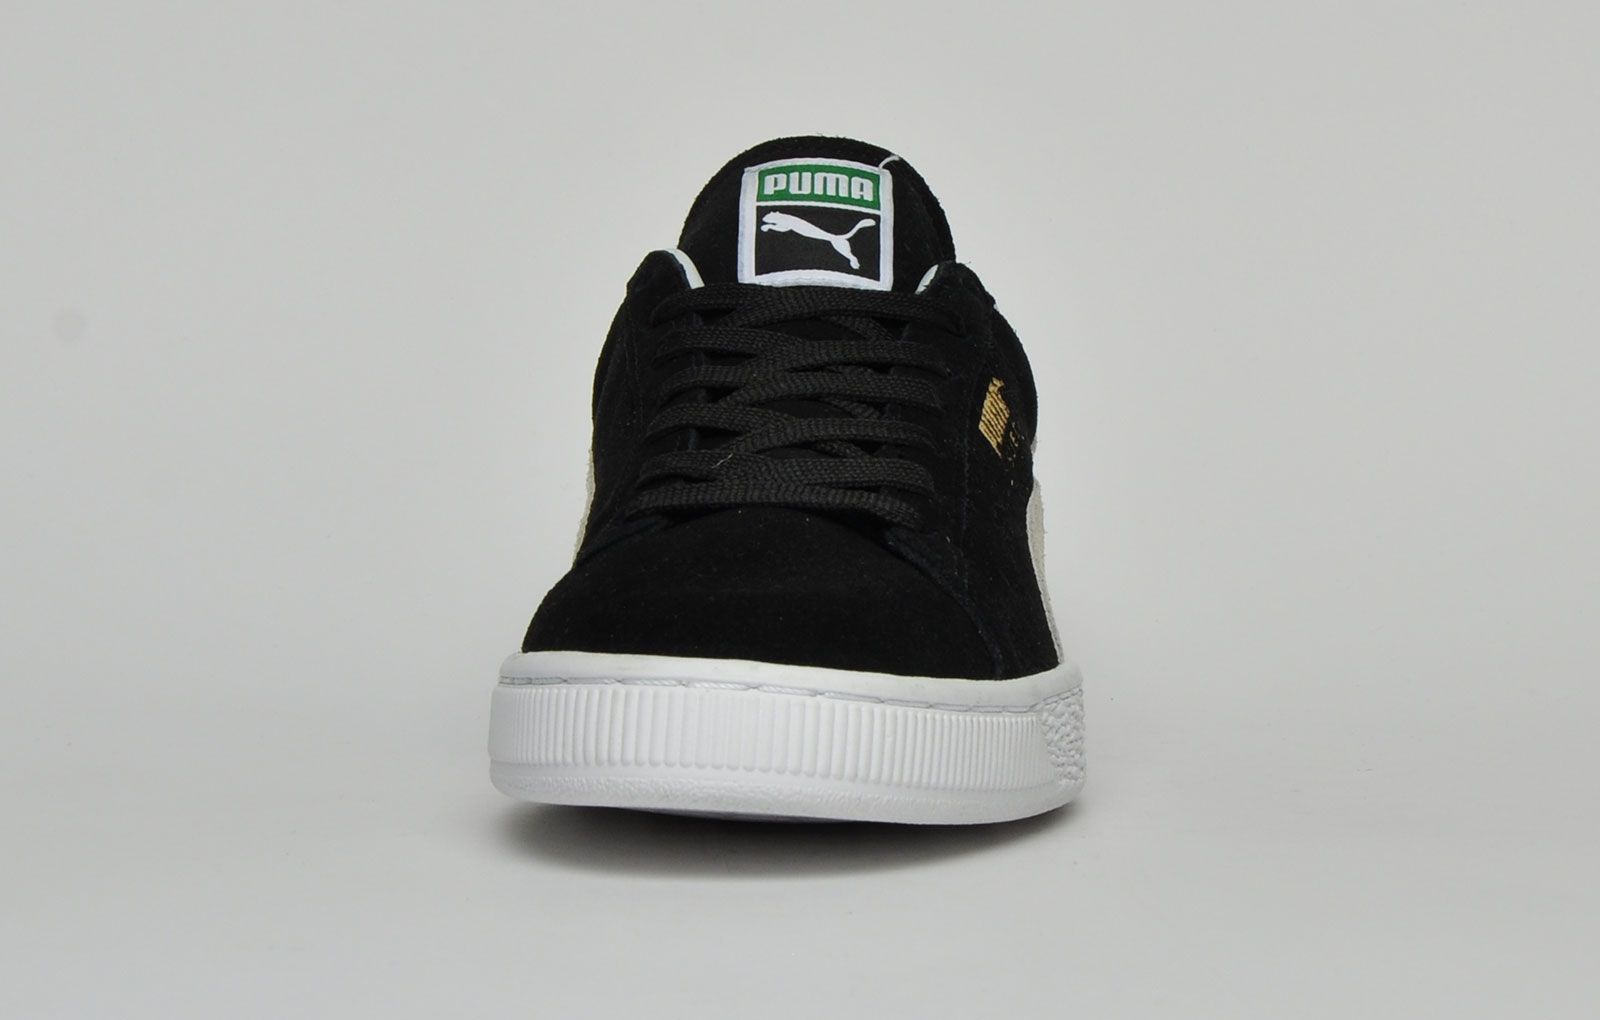 <p>The famous Puma Suede originally started its life as a basketball shoe in the 60s before receiving its hero cult status it now has due to trainer enthusiasts around the world falling for its amazing looks and great street appeal. A very stylish trainer sitting at the forefront of retro trainer appeal of the modern day. Inspired with that old school charm in mind, straight from the court this is an updated classic that will never go out of fashion and which takes, comfort, durability, and styling to the next level. This Puma Suede has an unmissable charm and creates the perfect trainer for individuals who want retro style and luxurious comfort all combined into one. Crafted in a premium suede leather with a Puma form stripe this is the epitome of a super cool trainer at an affordable price. Puma signature branding appears to the side upper and a full Puma Cat logo is also visible to the tongue. These suede’s have a padded heel and ankle arch for a comfortable fit and feature a contrasting textured midsole well suited to the rigors of an active lifestyle. </p> <p>- Premium suede leather upper</p> <p> - Secure lace up system </p> <p>- vintage styled wrap around sole</p> <p>- Additional cushioning and added ankle support</p> <p>- Durable outsole with treaded design for added grip</p> <p>- Puma branding throughout </p>